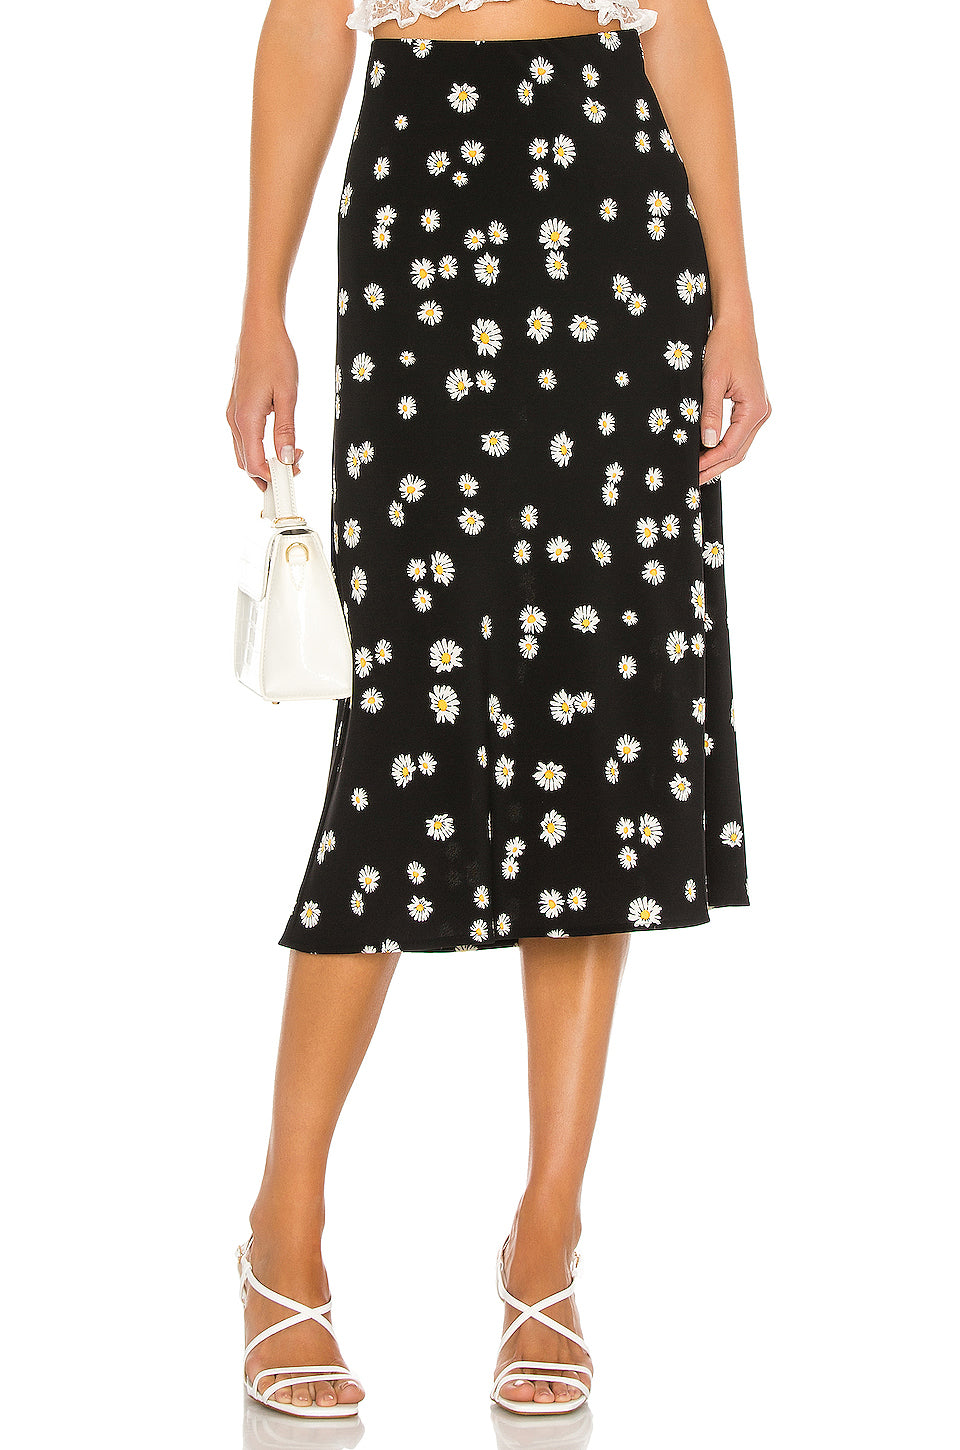 Everyday Midi Skirt Black Daisy Chain - Kingfisher Road - Online Boutique